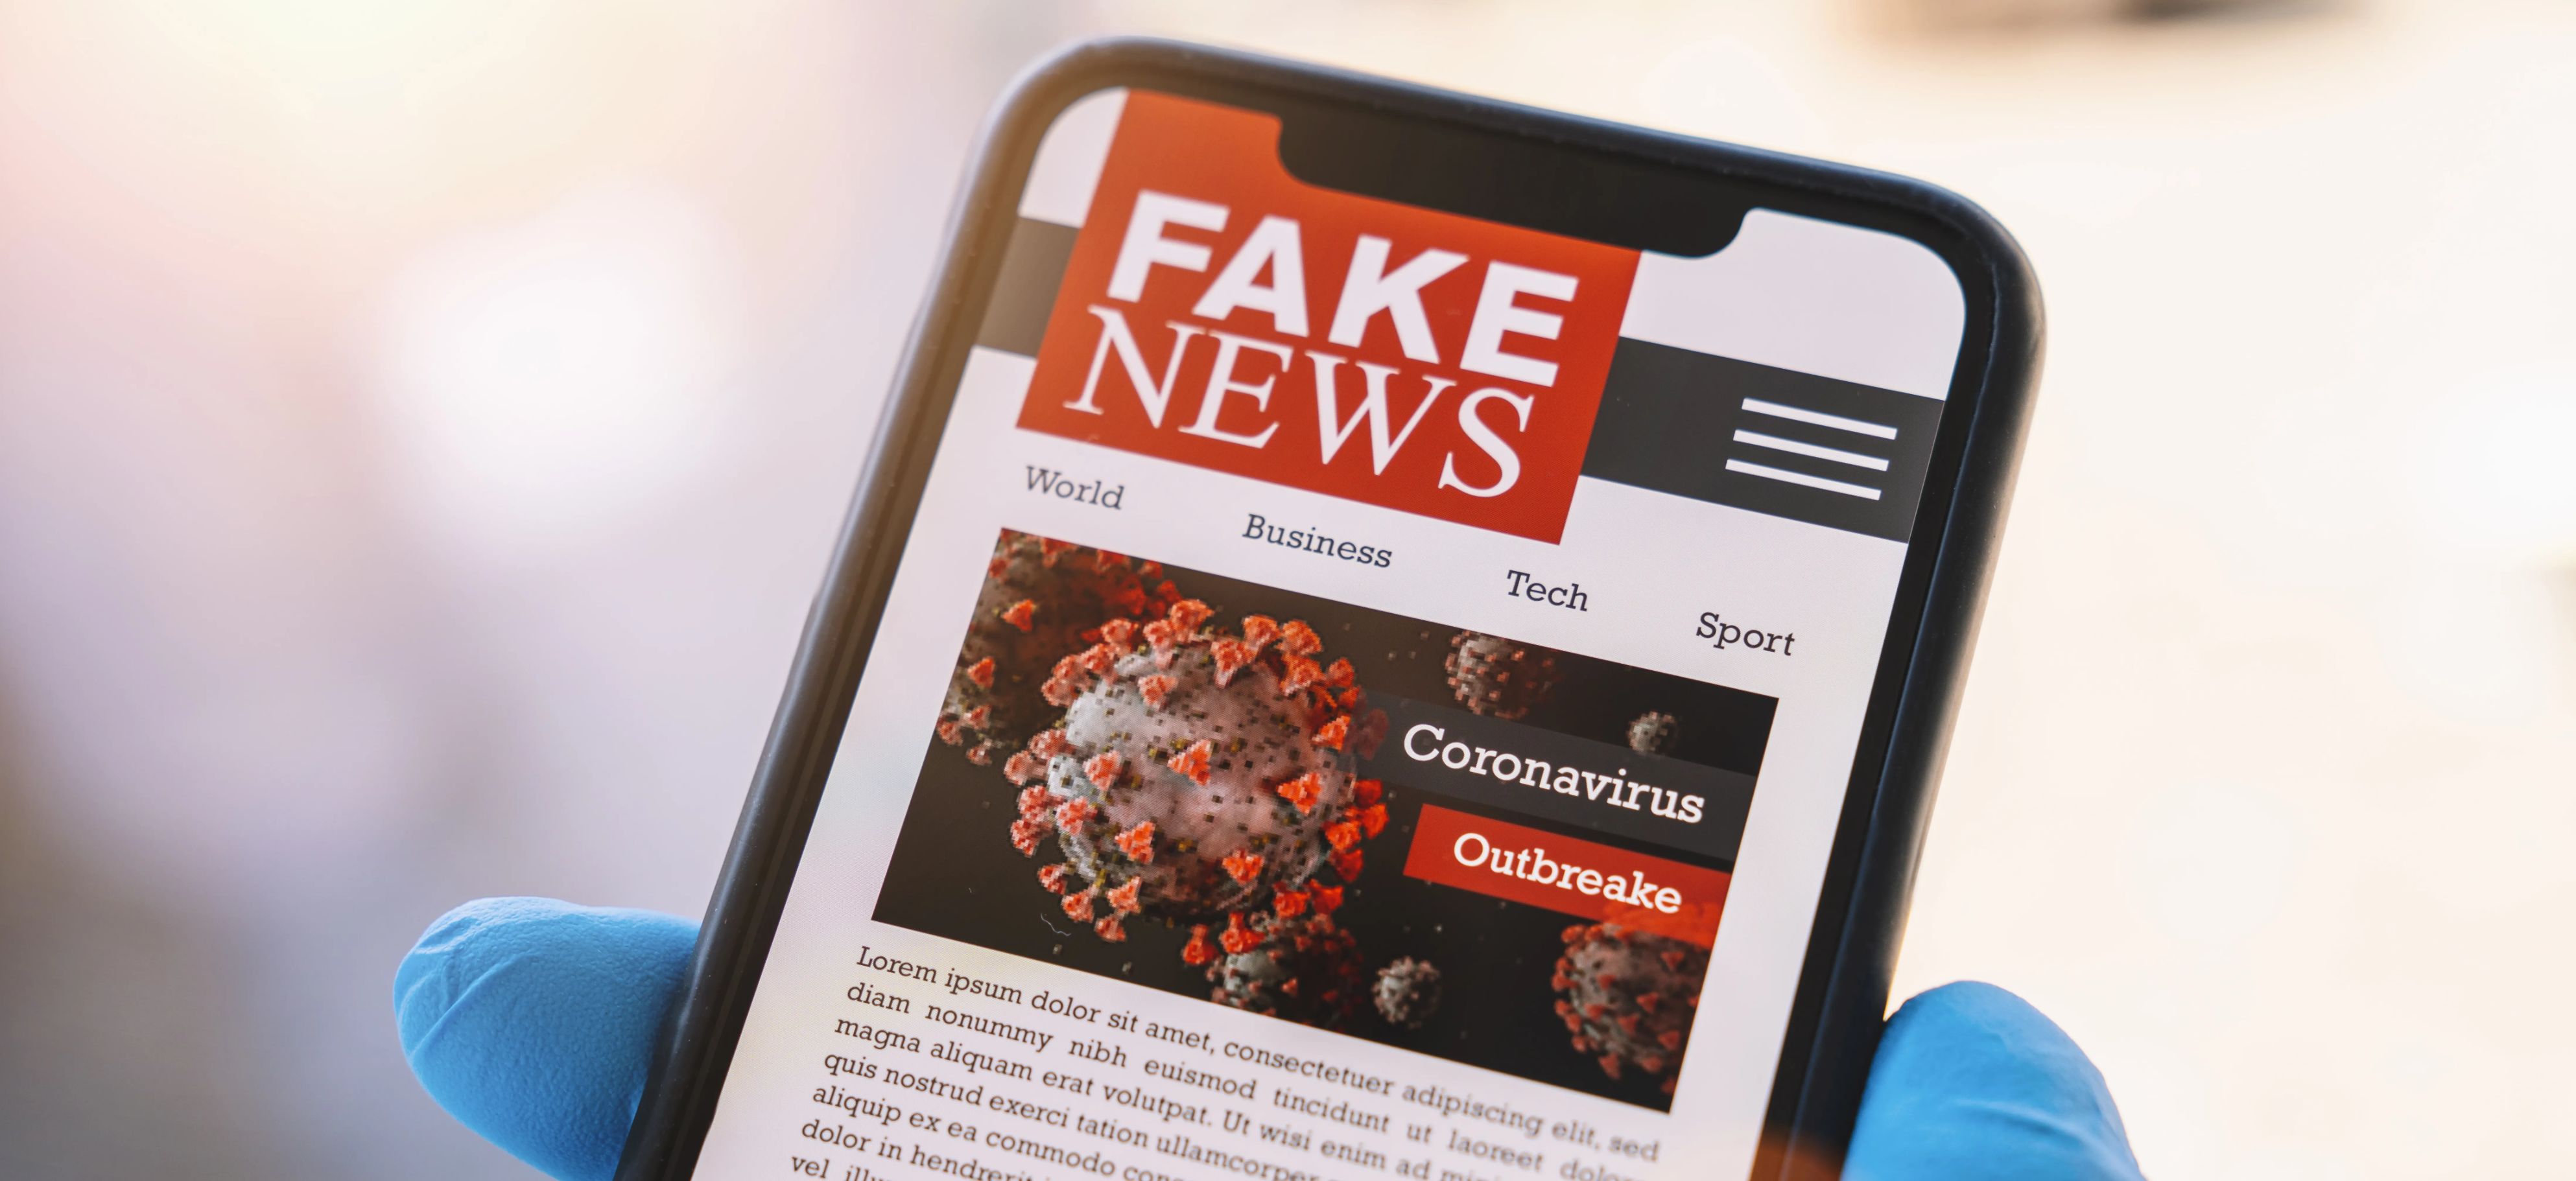 'Fake news' website is seen on a smartphone screen.